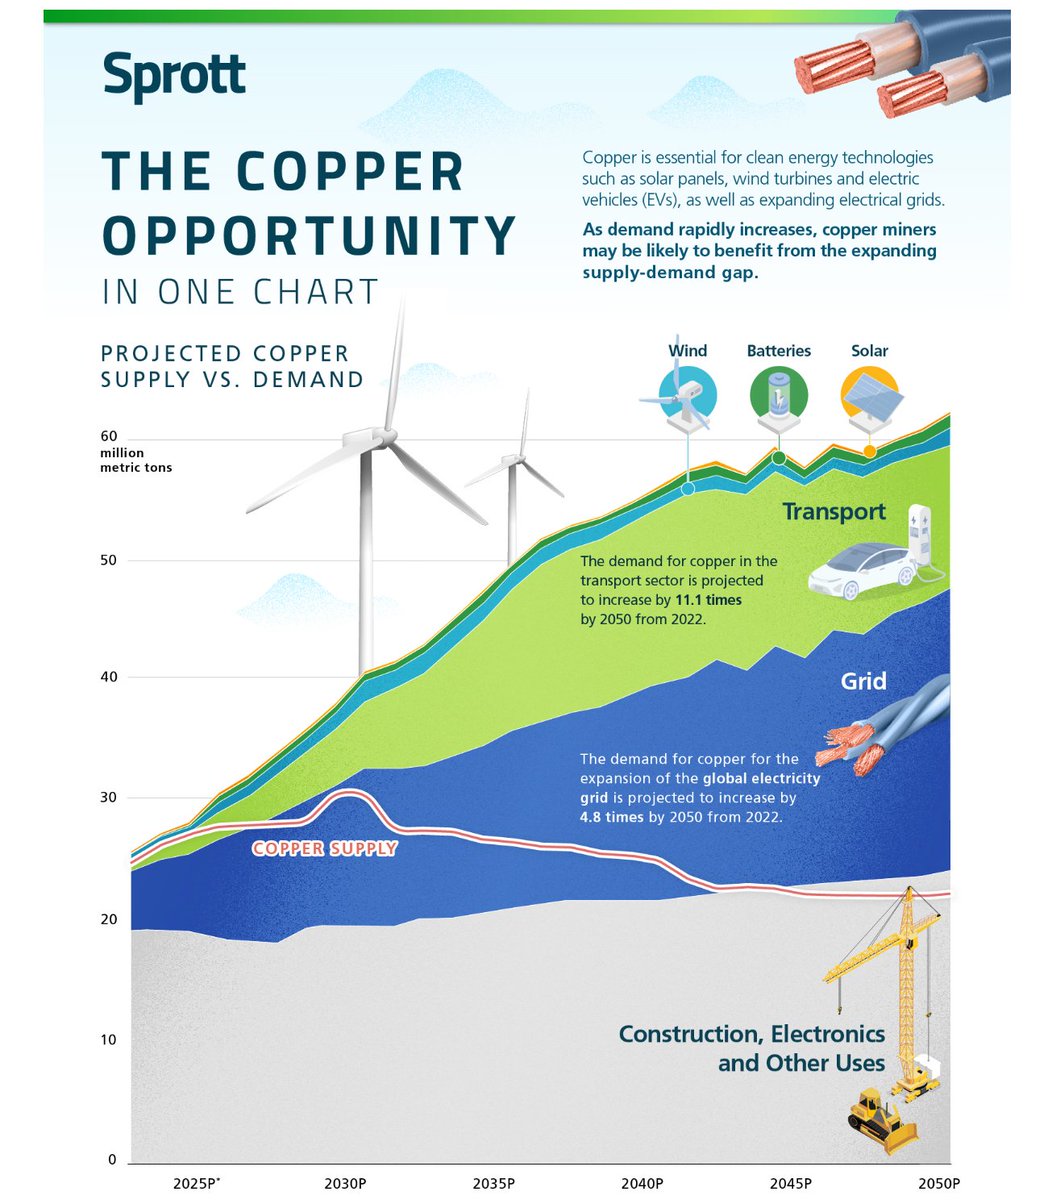 According to this, even with no EVs, we still see 2x more #copper demand than supply by 2050...

And no year of surplus—ever.